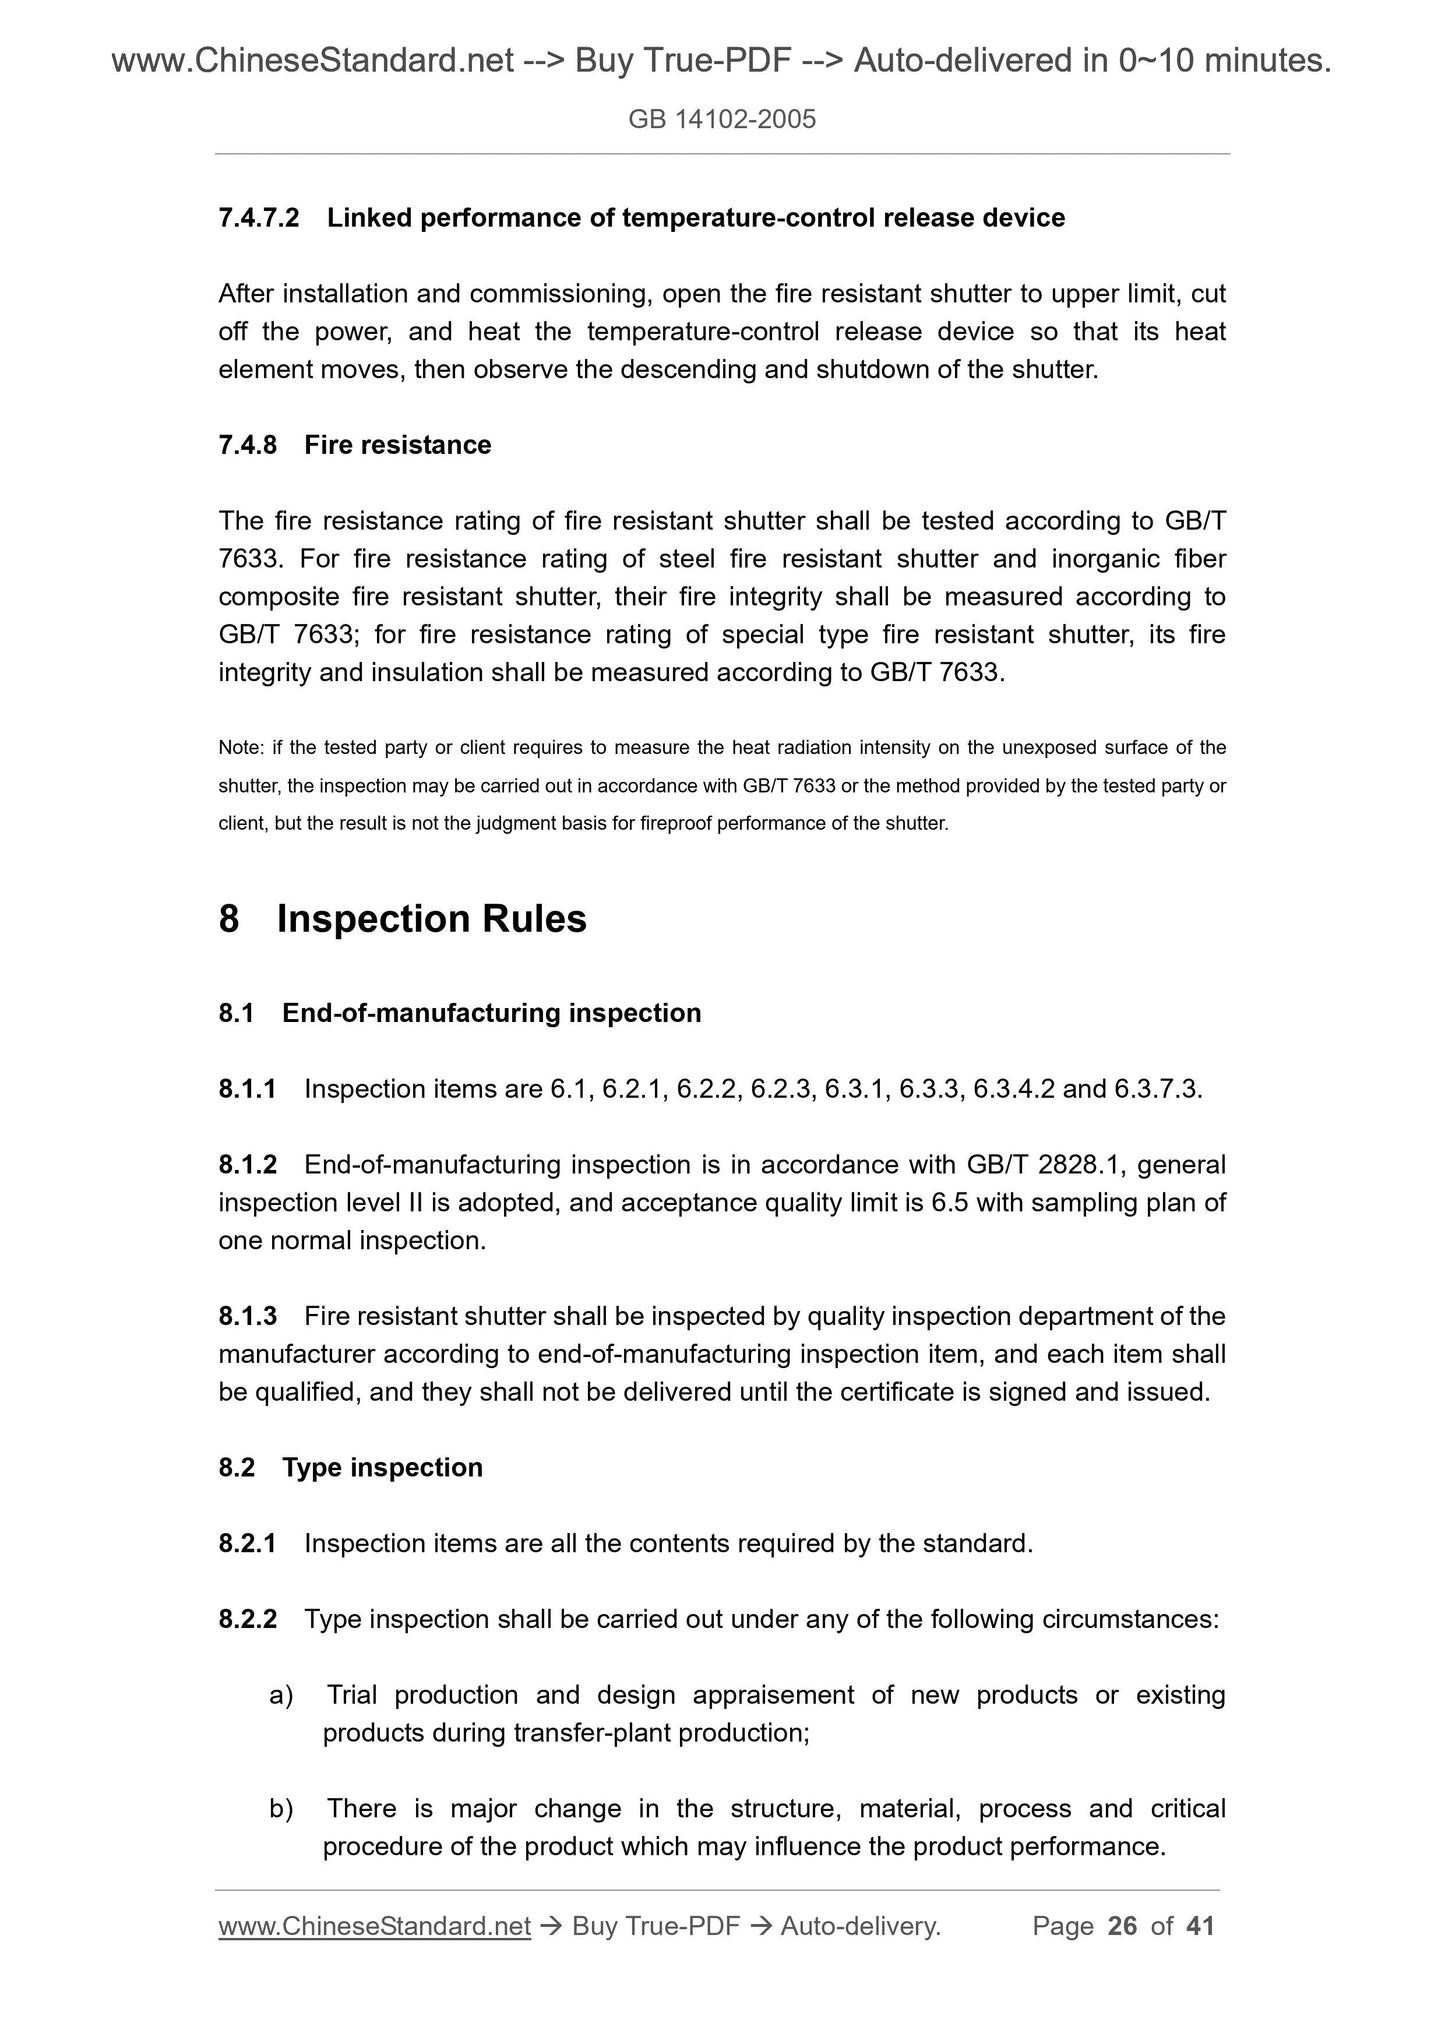 GB 14102-2005 Page 11